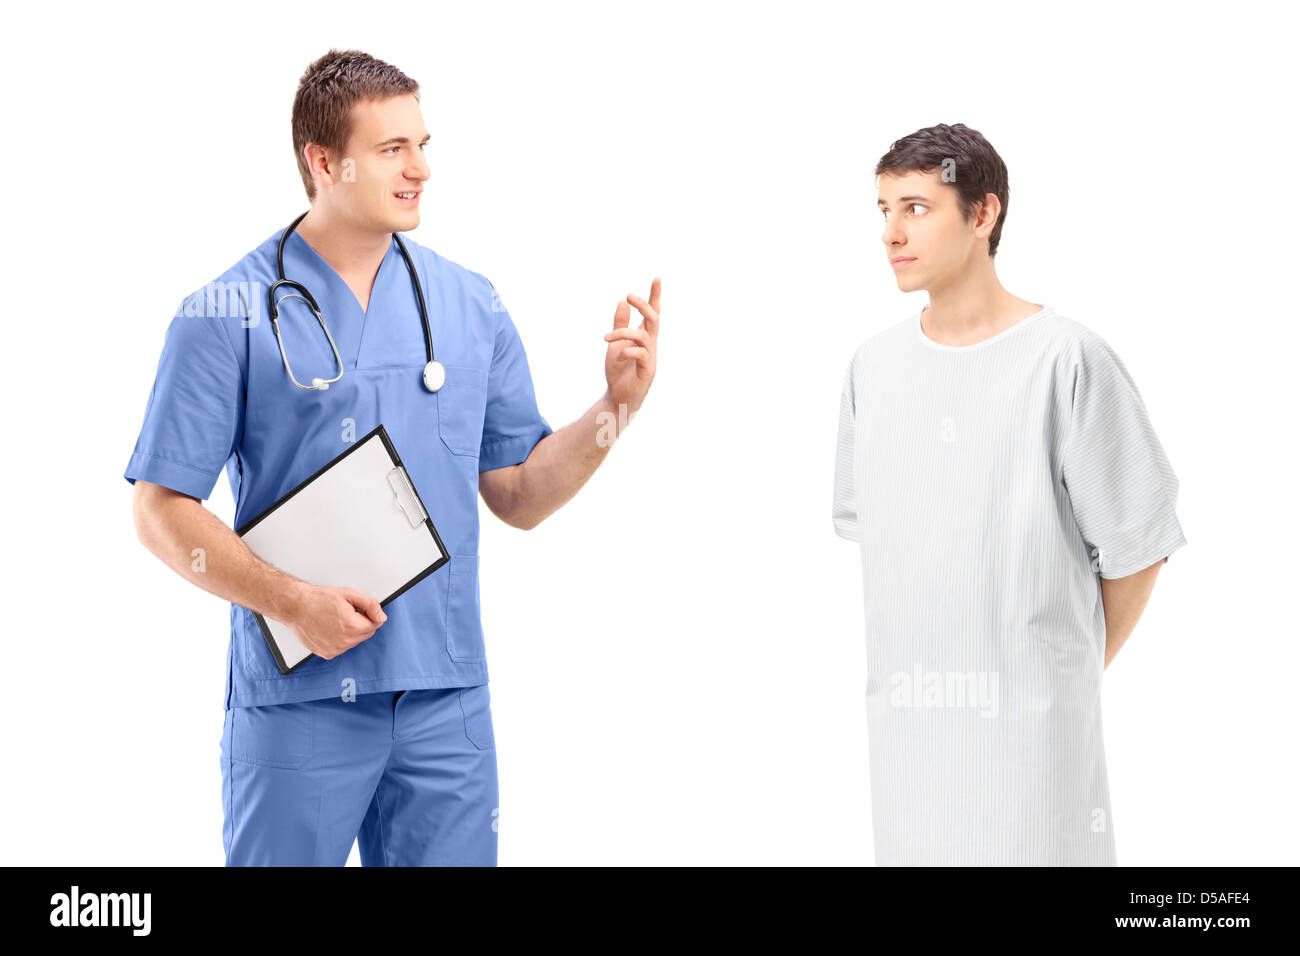 A male patient in a hospital gown and medical practitioner during a discussion isolated on white background Stock Photo